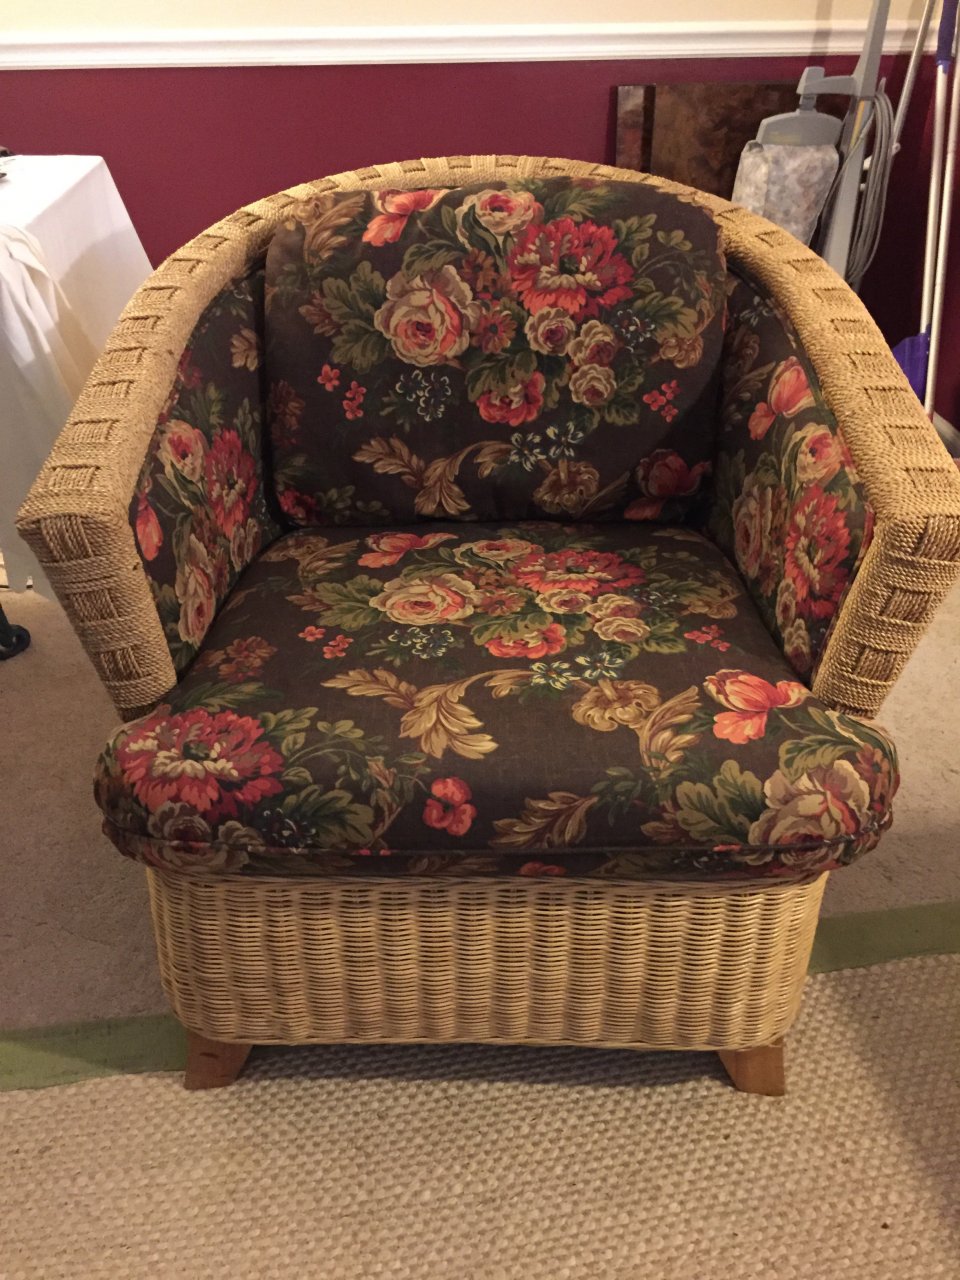 How Much Should I Sell This Henry Link Wicker Chair For I Think